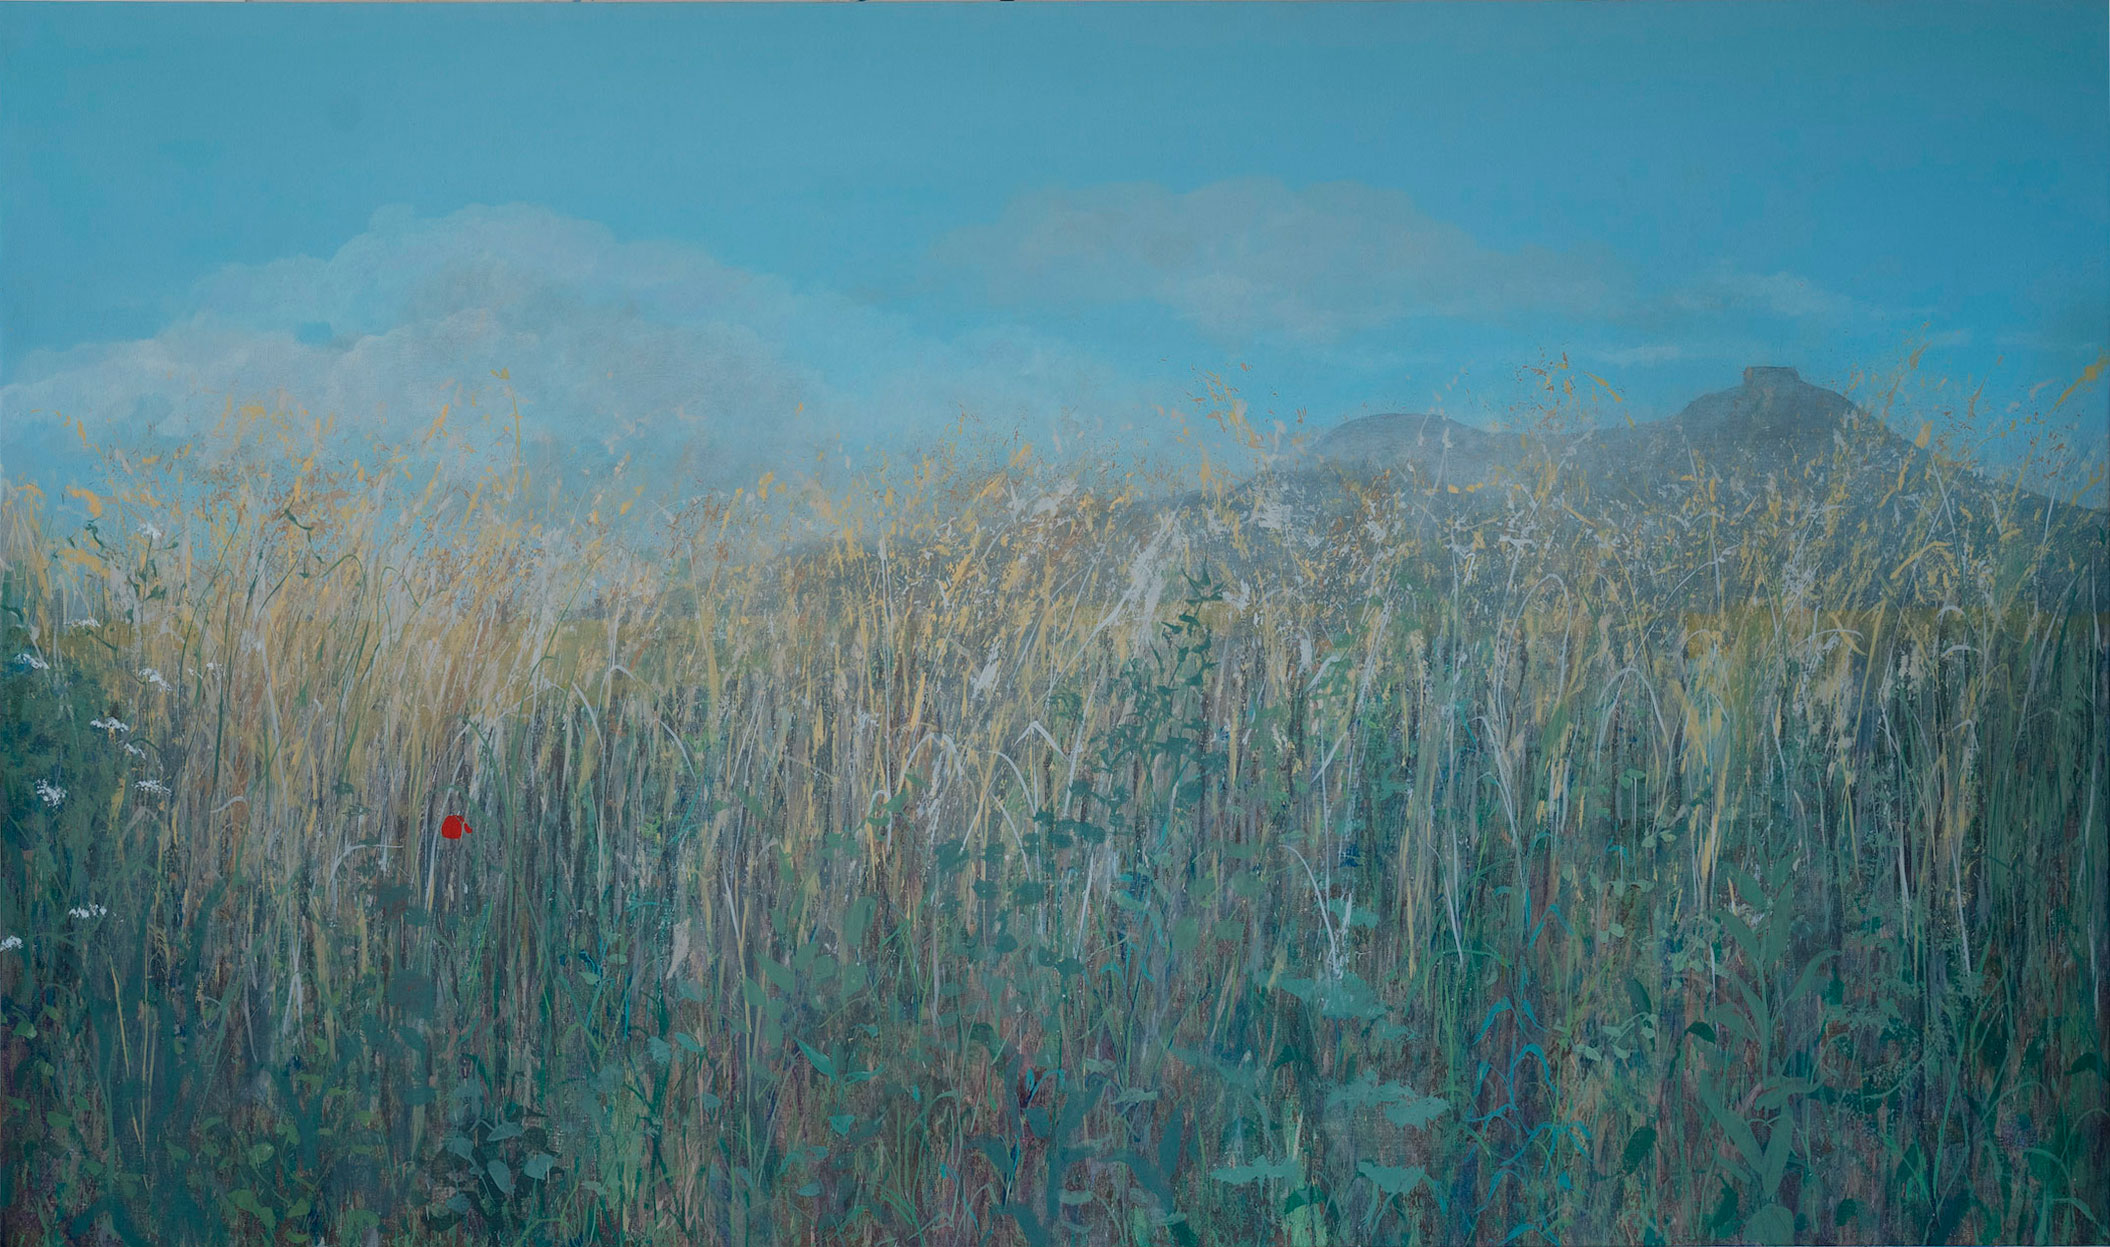 Field for Isabel - oil on canvas - 115x195cm. Alicia Marsans